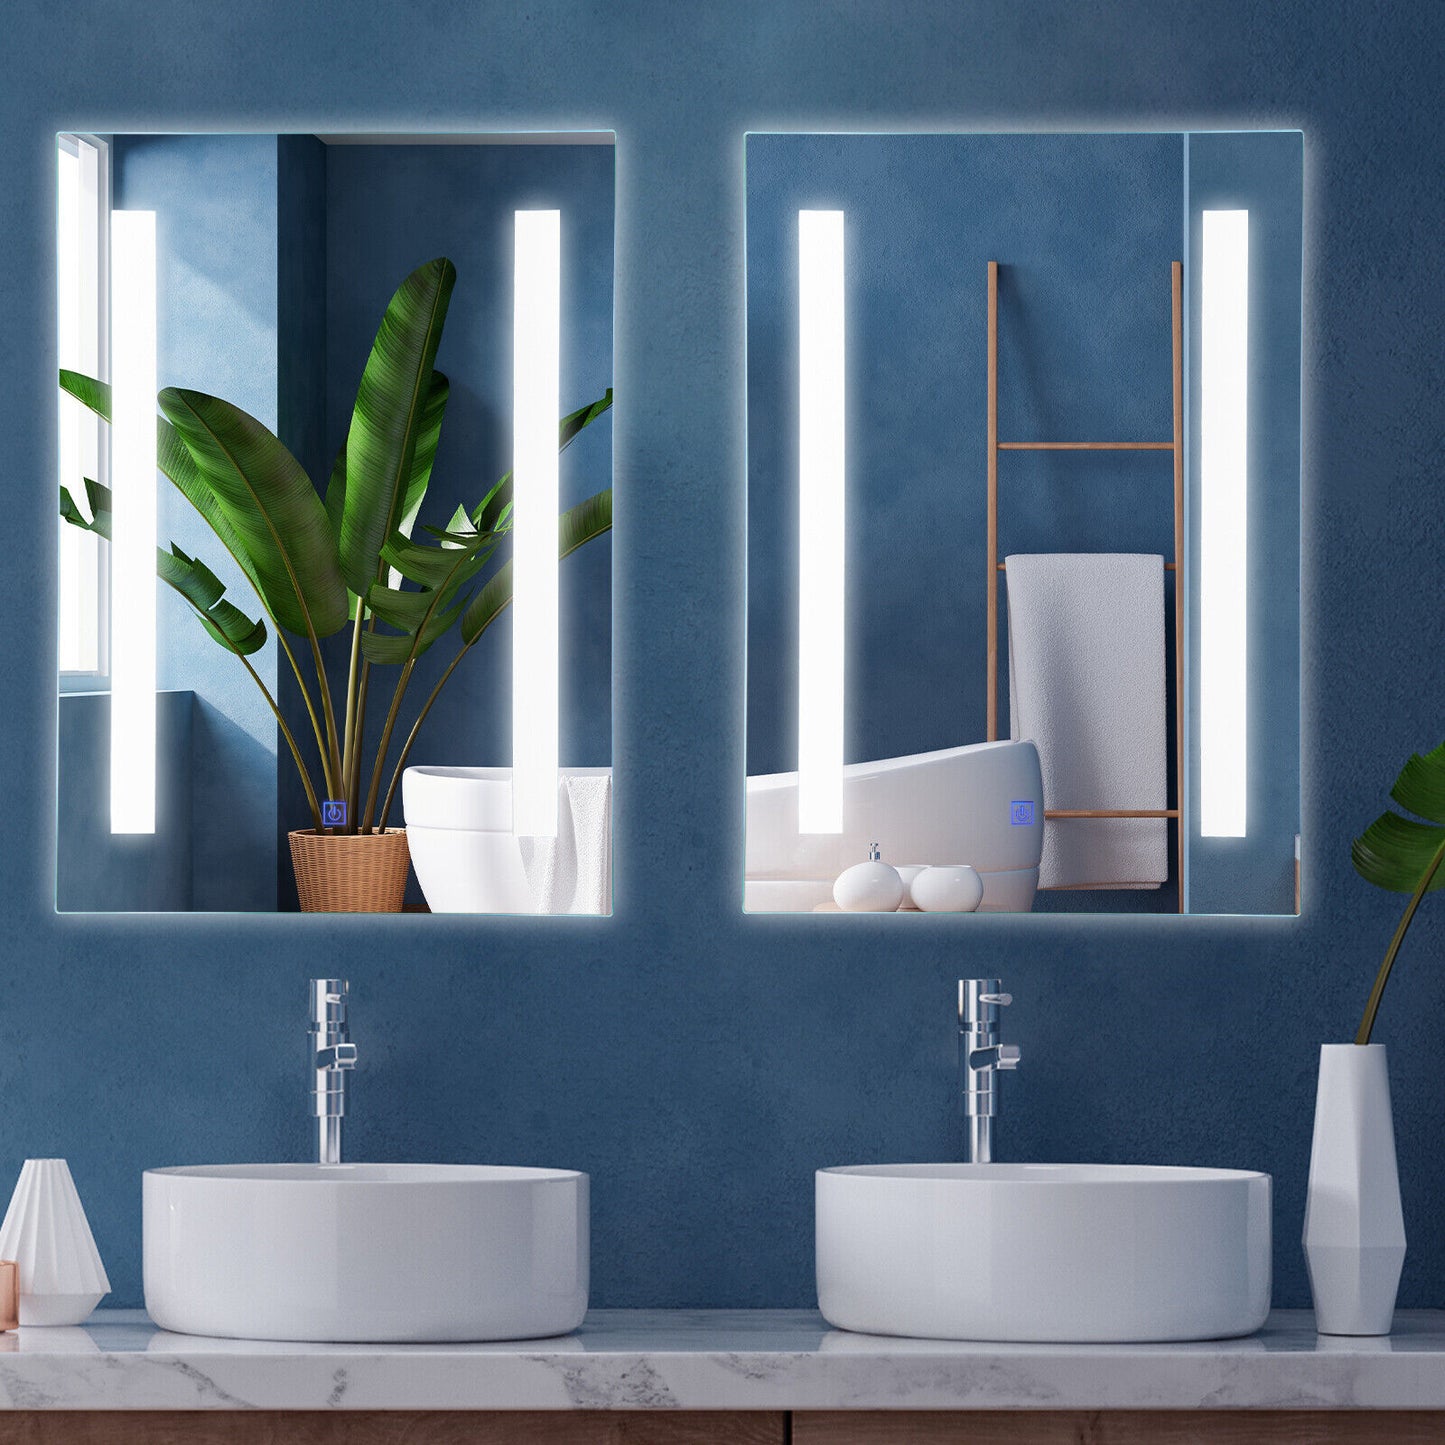 Mirrors - 27.5 by 20 Inches Wall Mounted 3 Color Bathroom Mirror